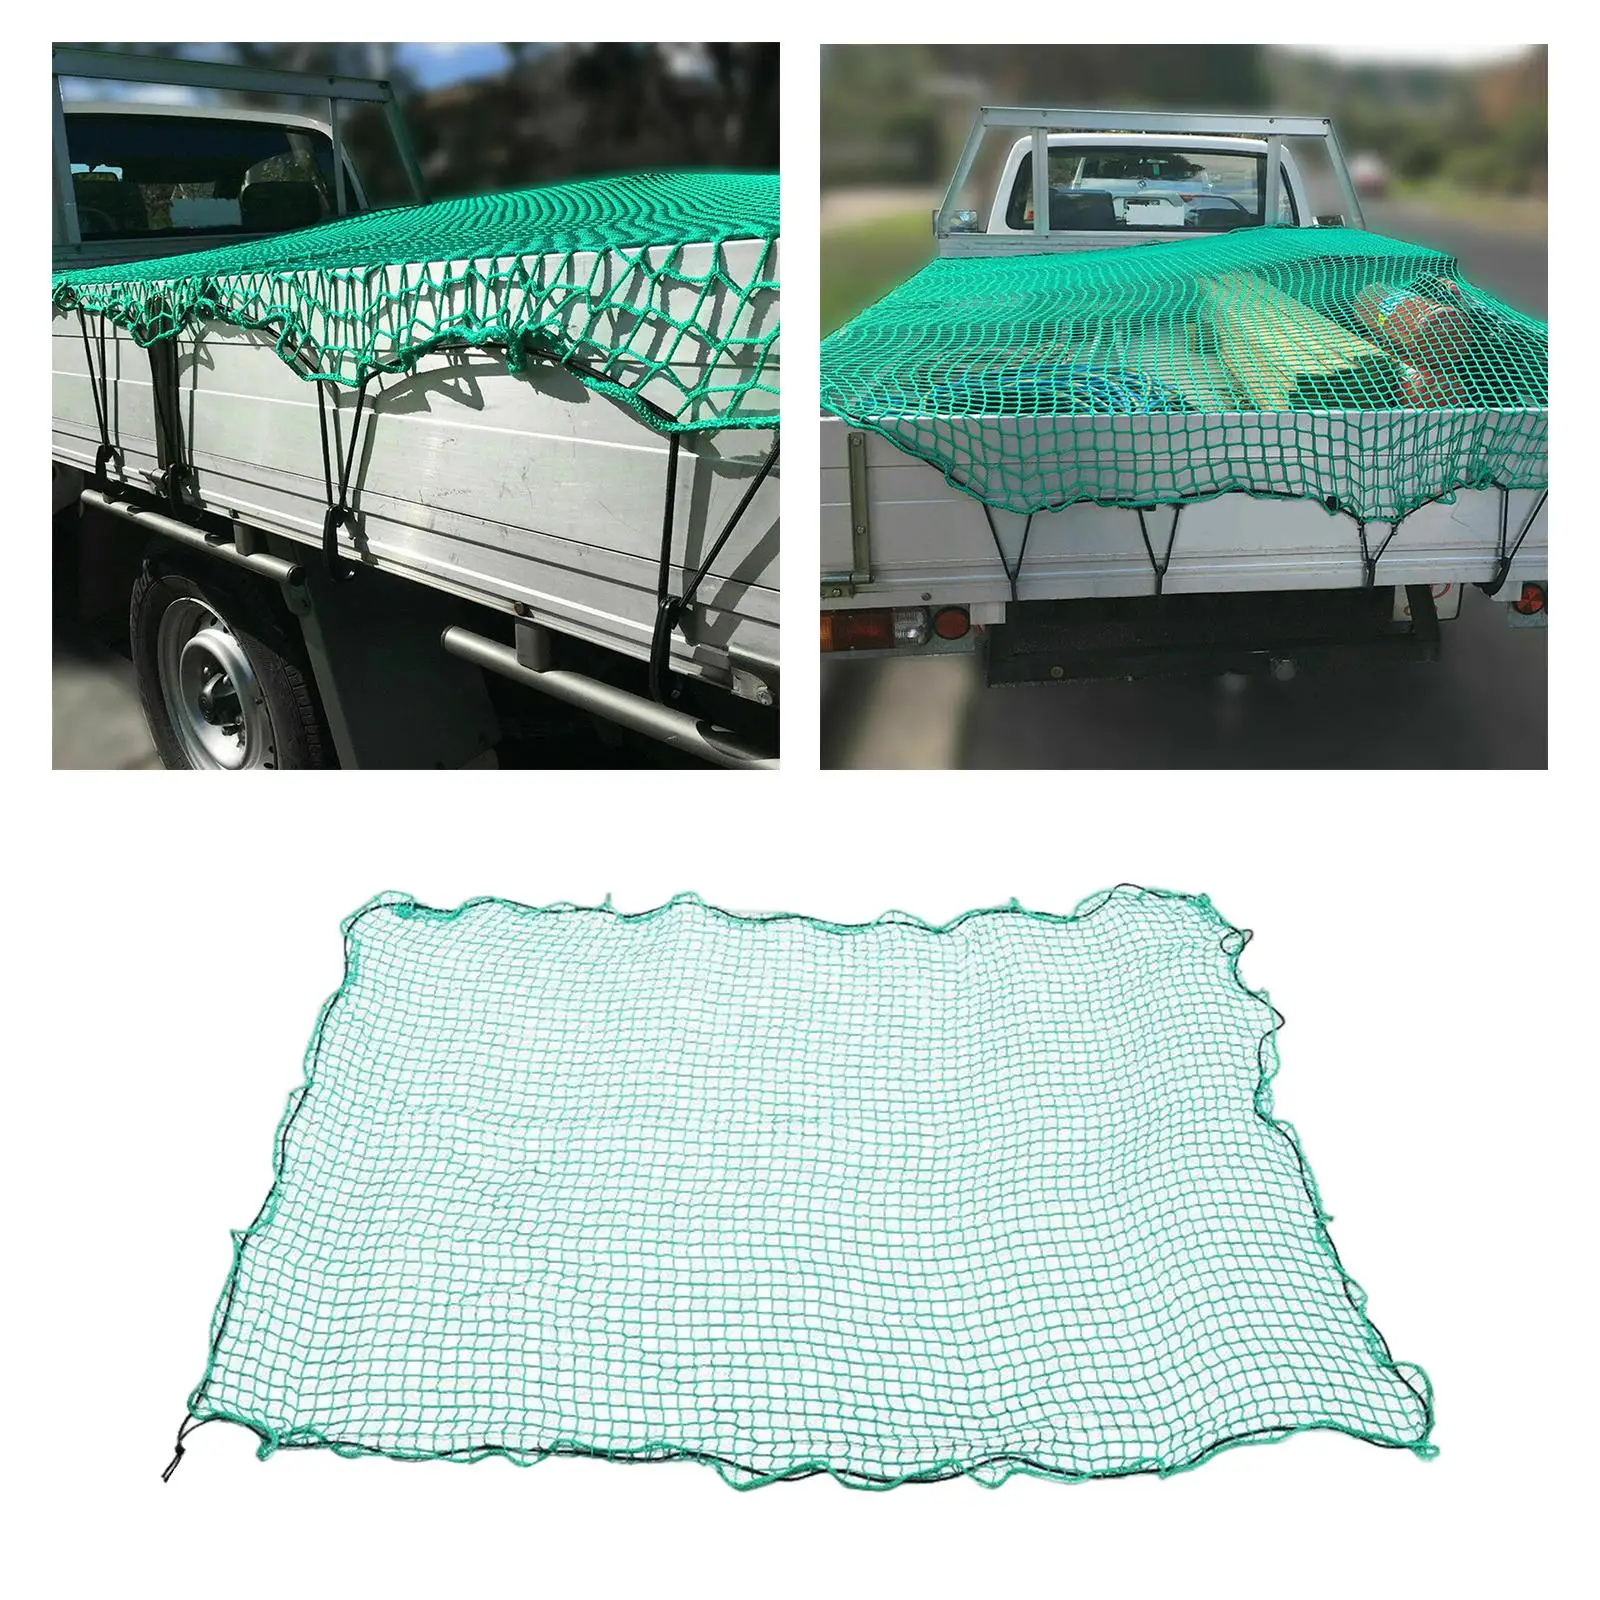 Heavy Duty Bungee Cargo Net 8.2` x 11.5` Mesh Net Stretchable Adjustable Car Storage Net Fit for Truck Bed Pickup Truck Trailer